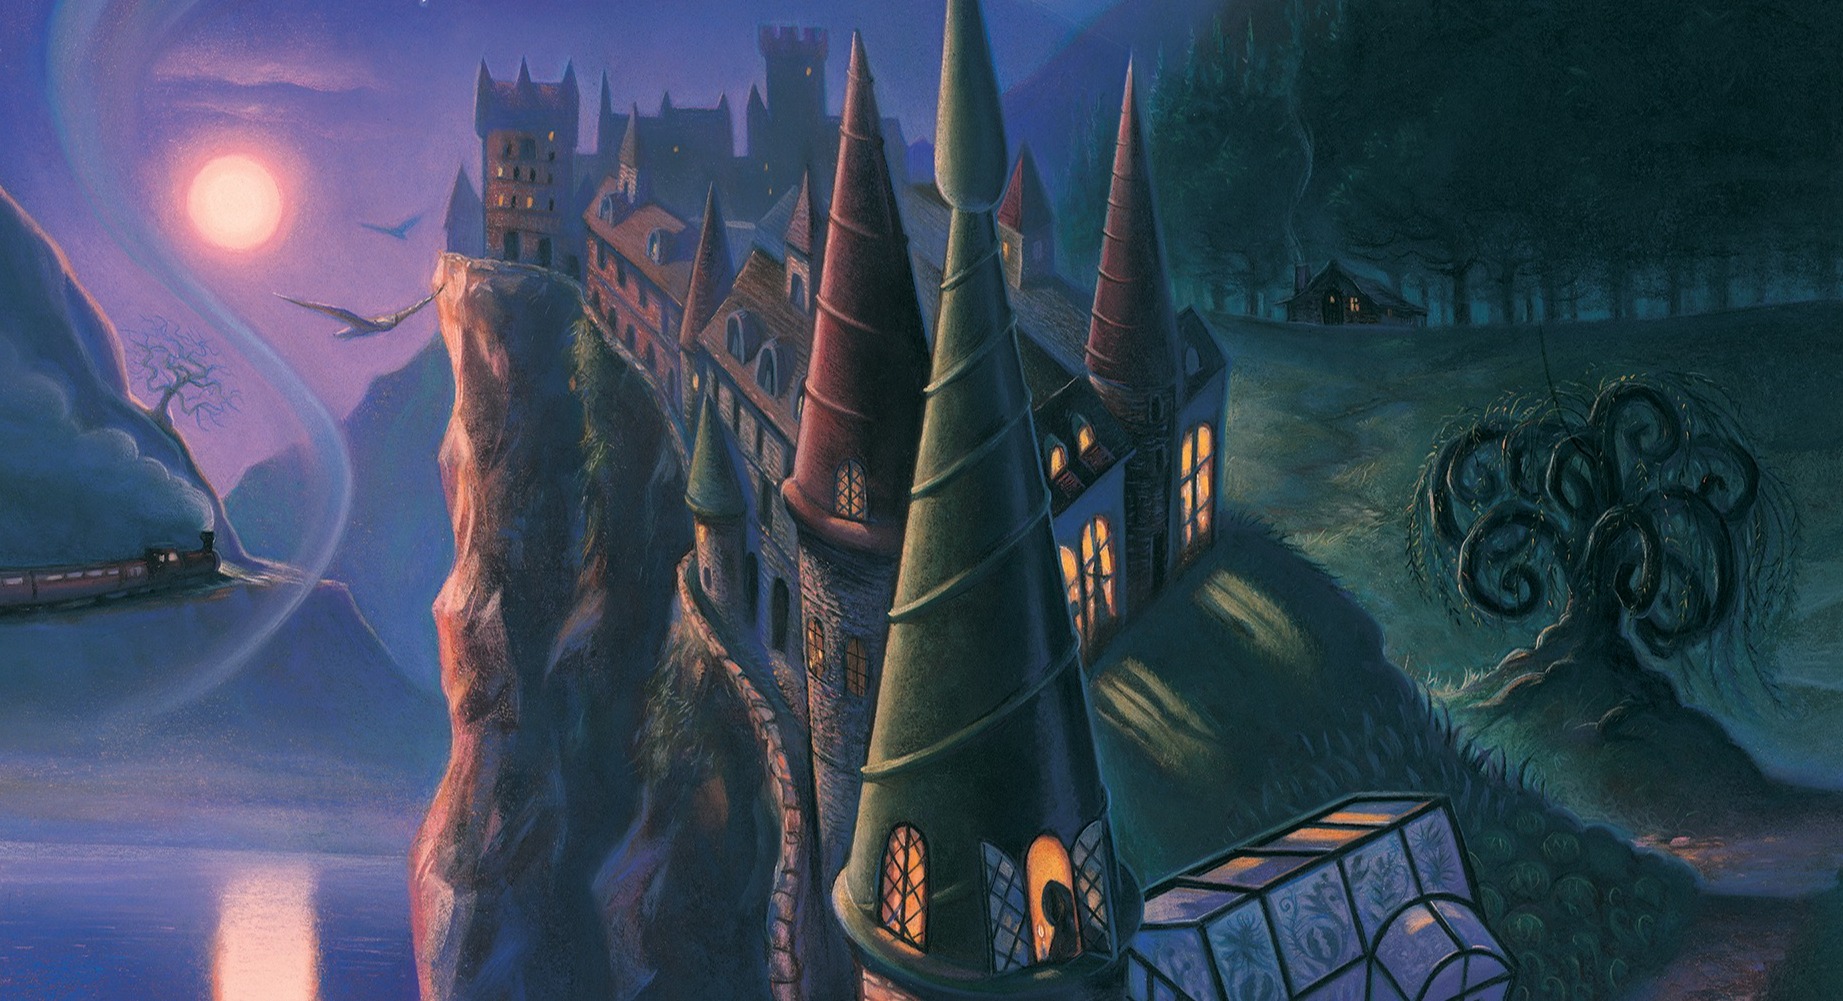 Harry Potter': Cool Interesting Things to Learn About Hogwarts